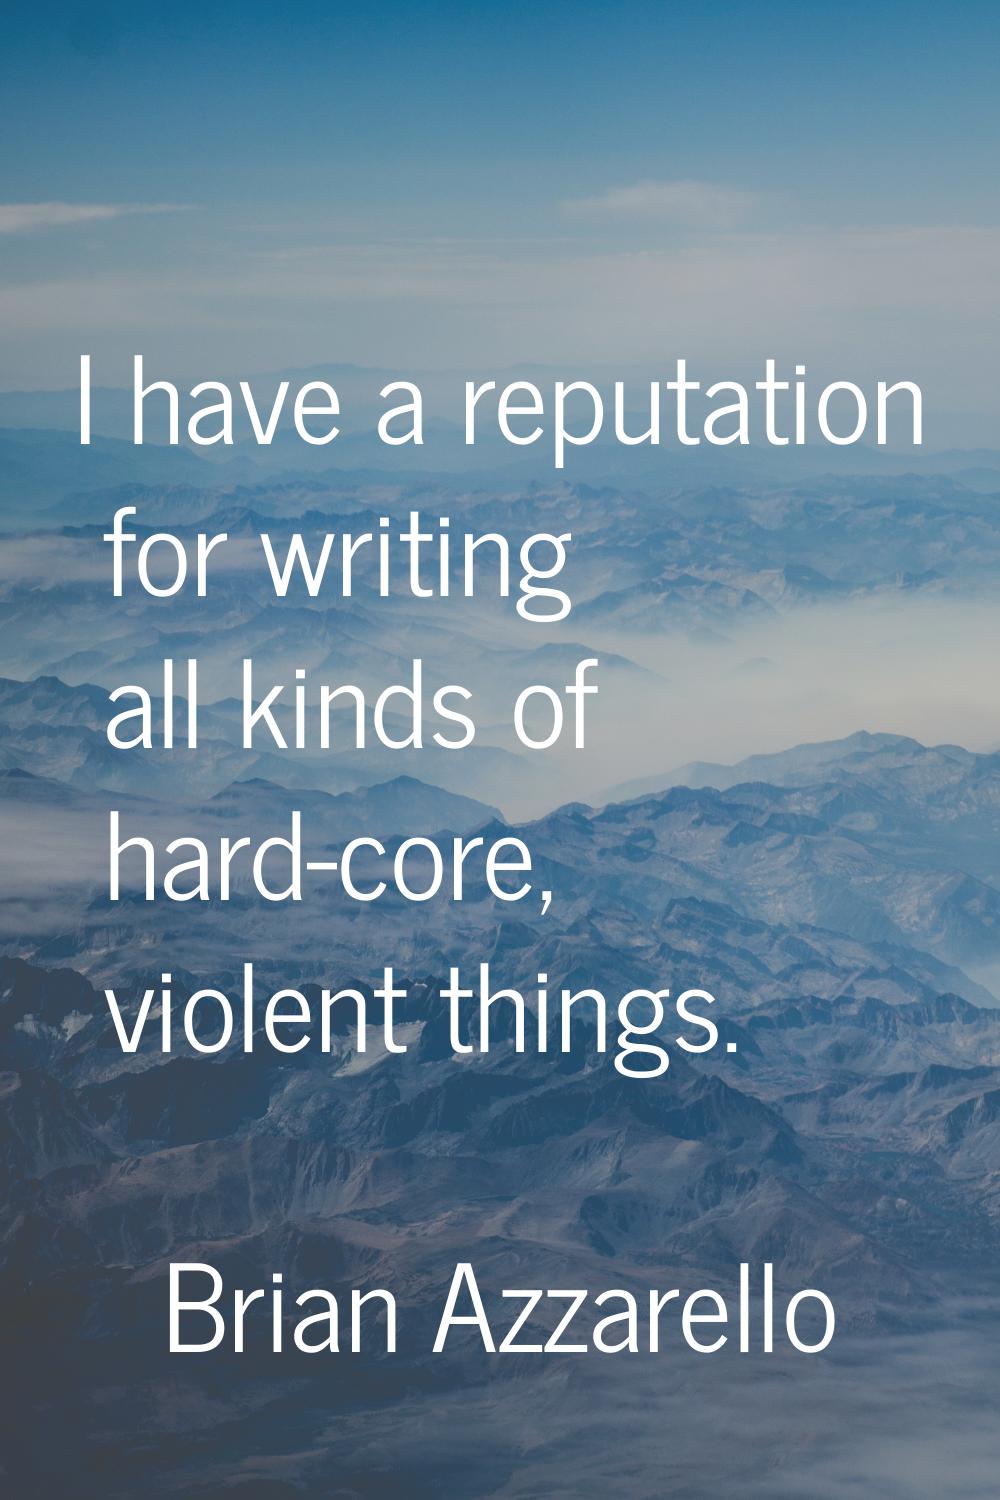 I have a reputation for writing all kinds of hard-core, violent things.